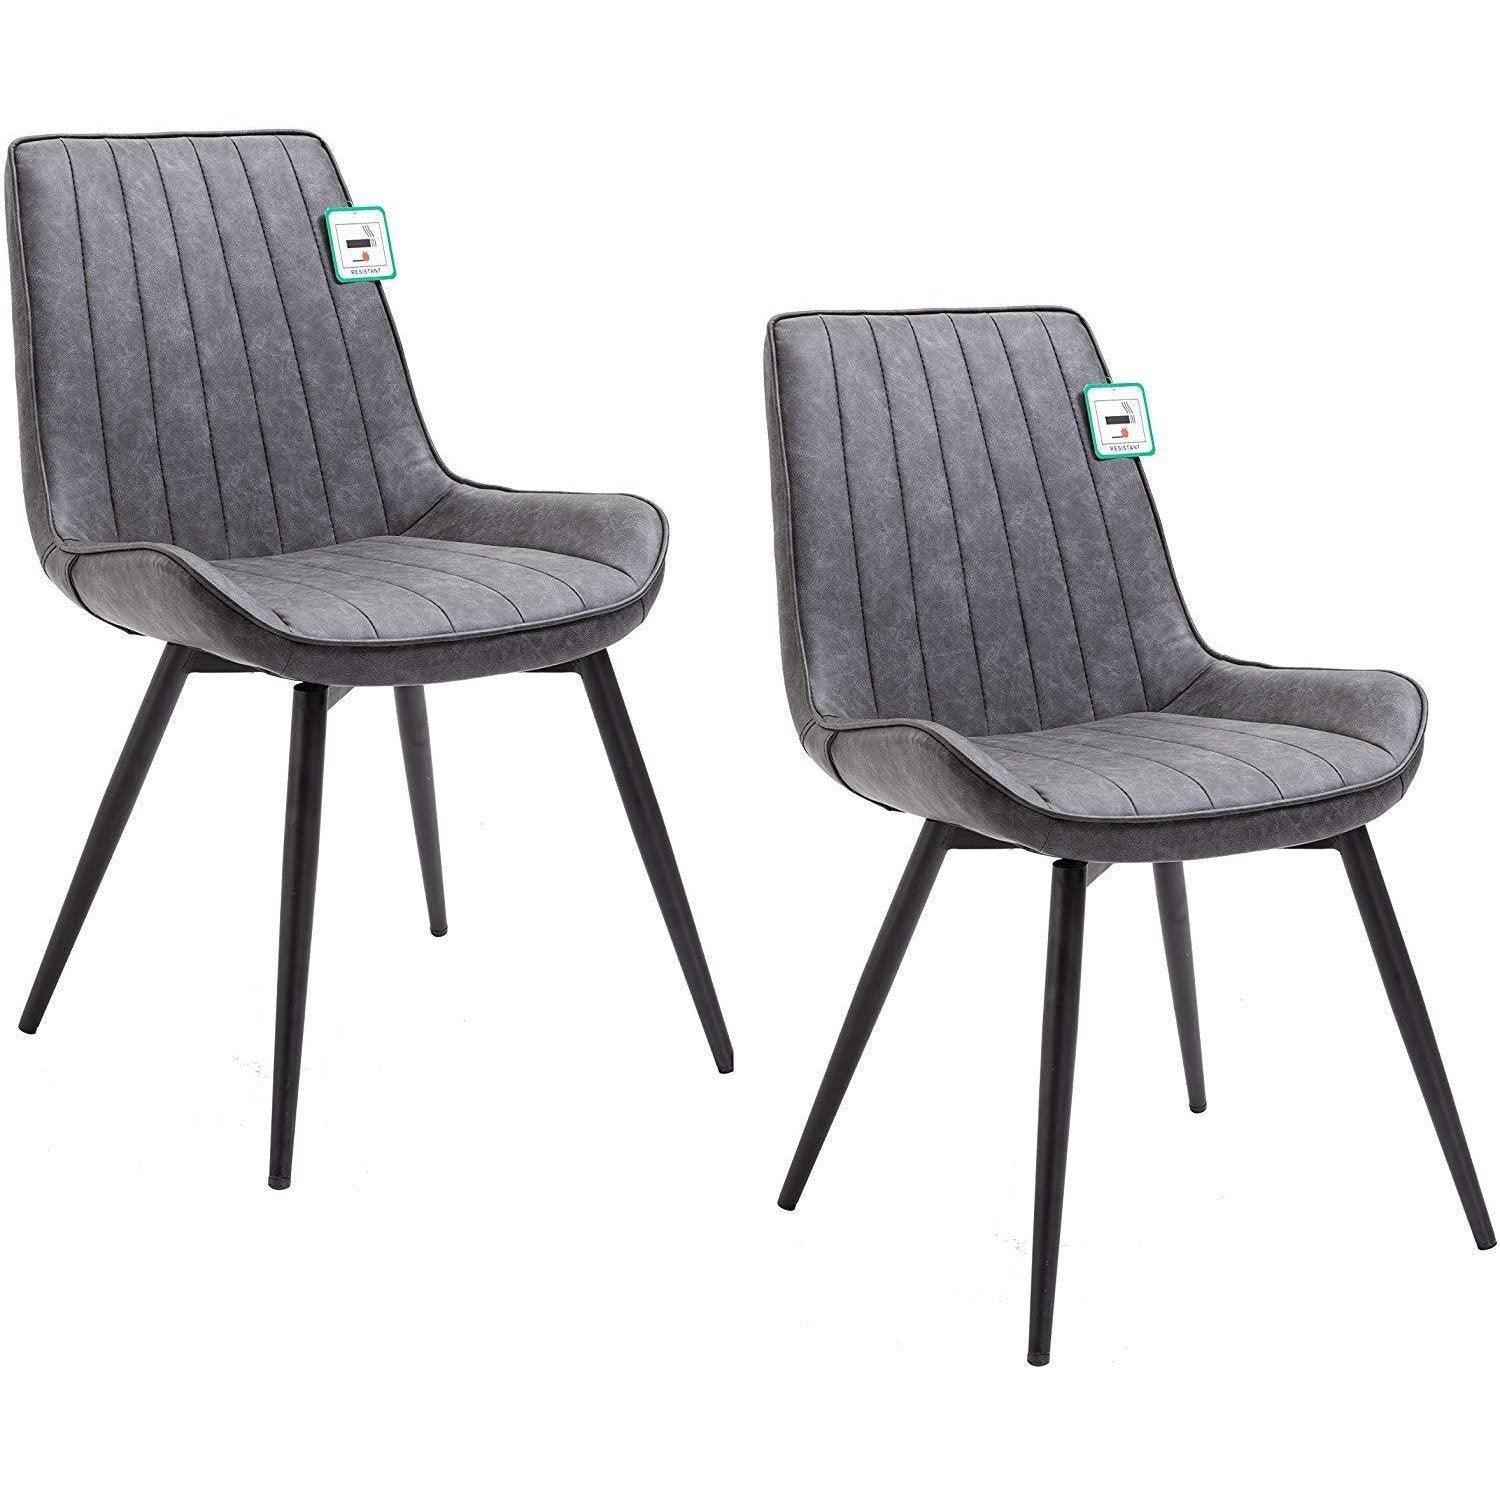 Cala Set of 2 Grey PU leather Dining Chairs